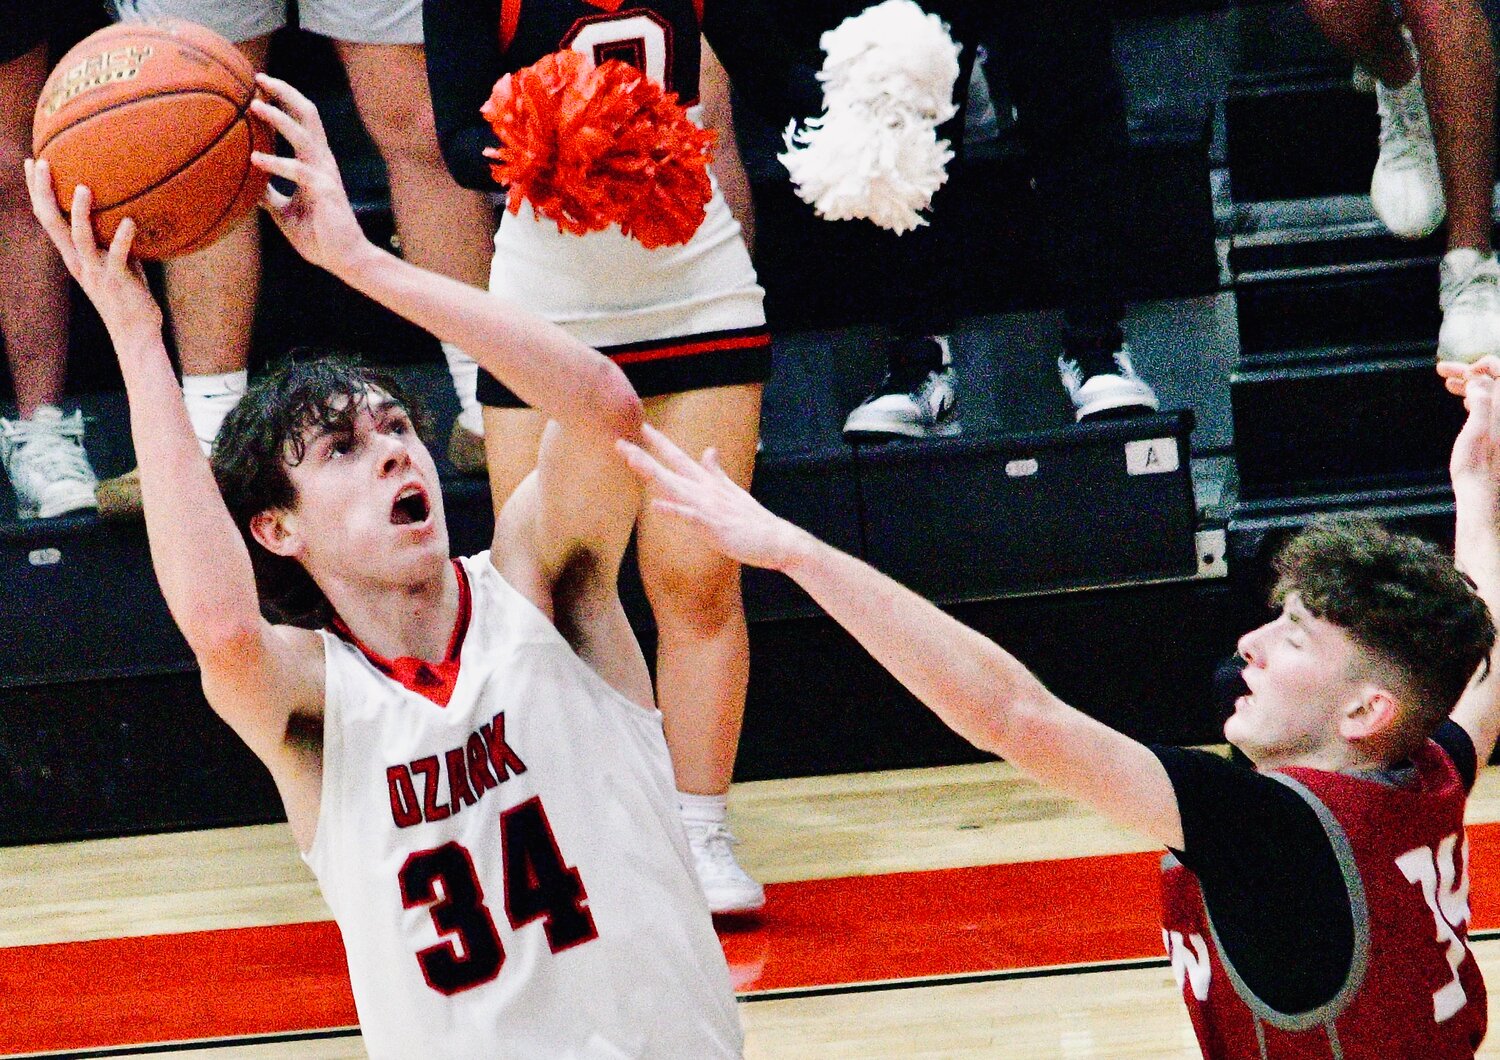 OZARK'S COHEN GEORGE looks to score in the paint.